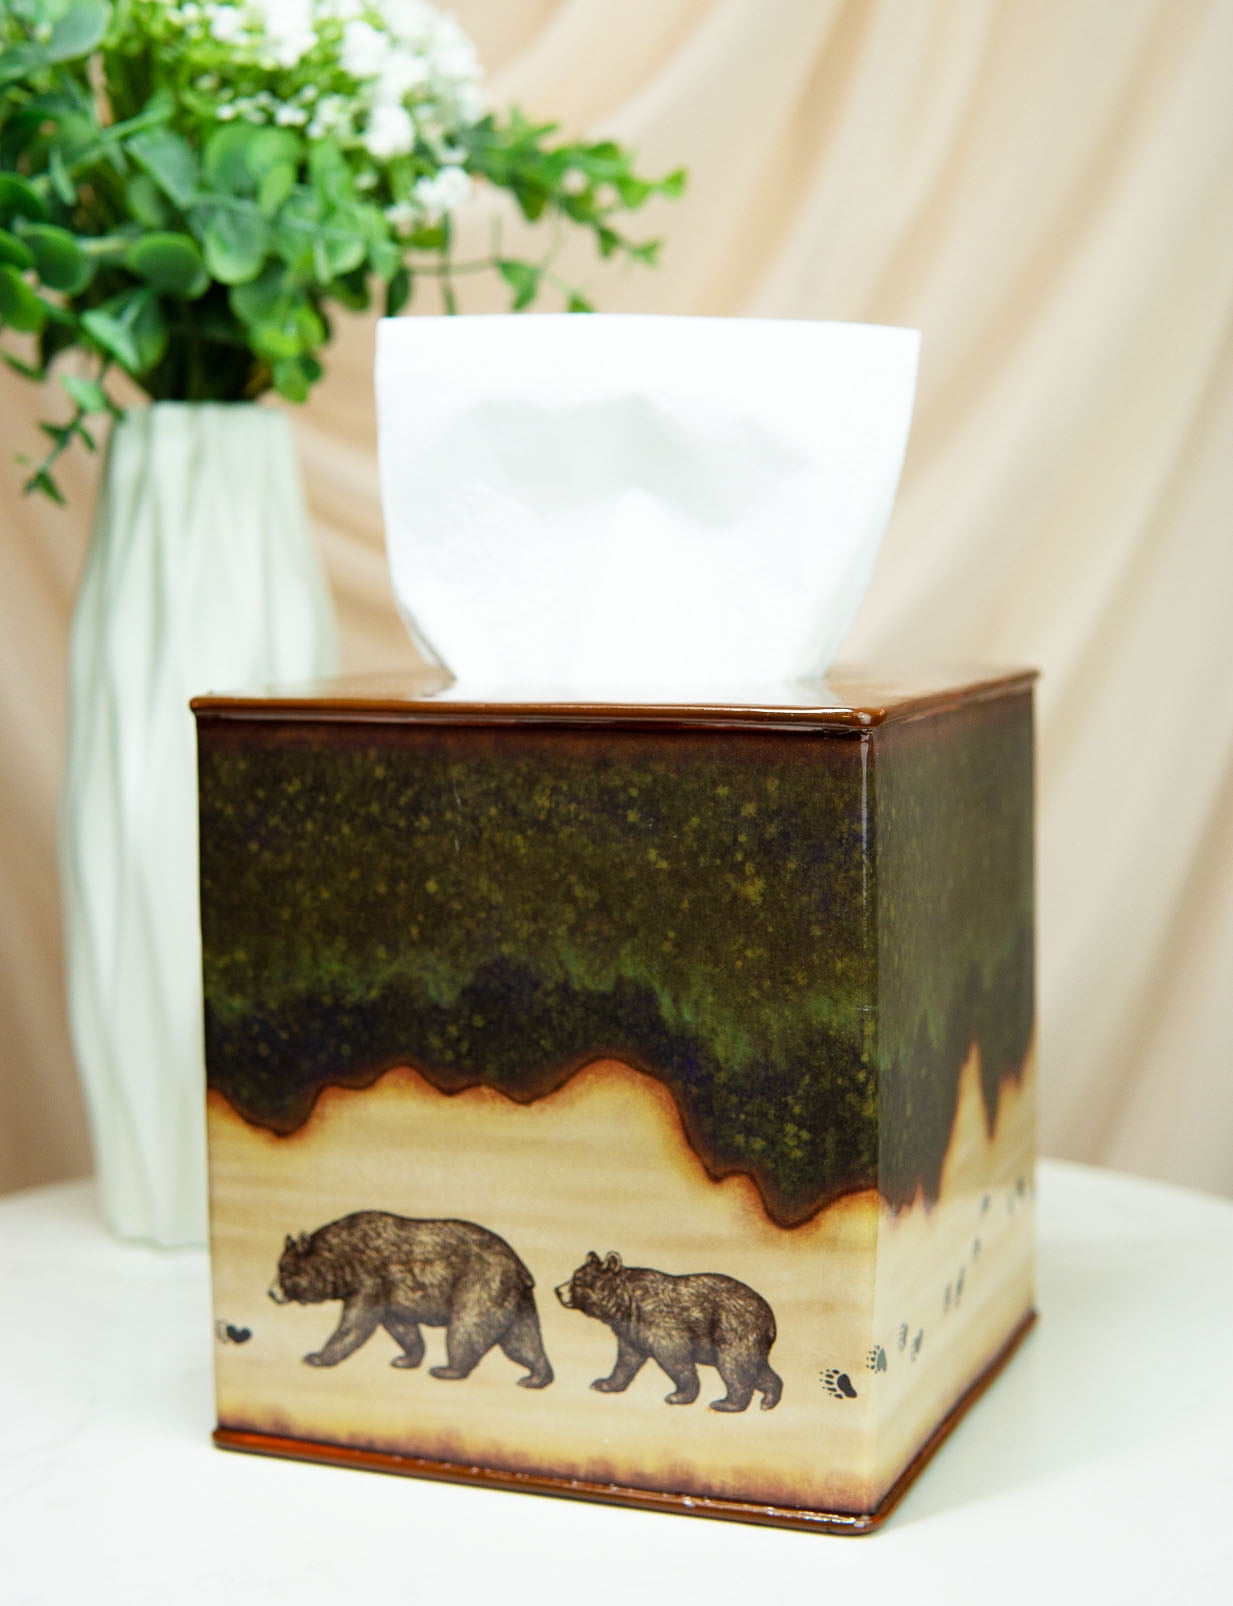 Details about   Rustic Western Mustang Horse By Pine Trees Silhouette Tissue Box Cover Holder 